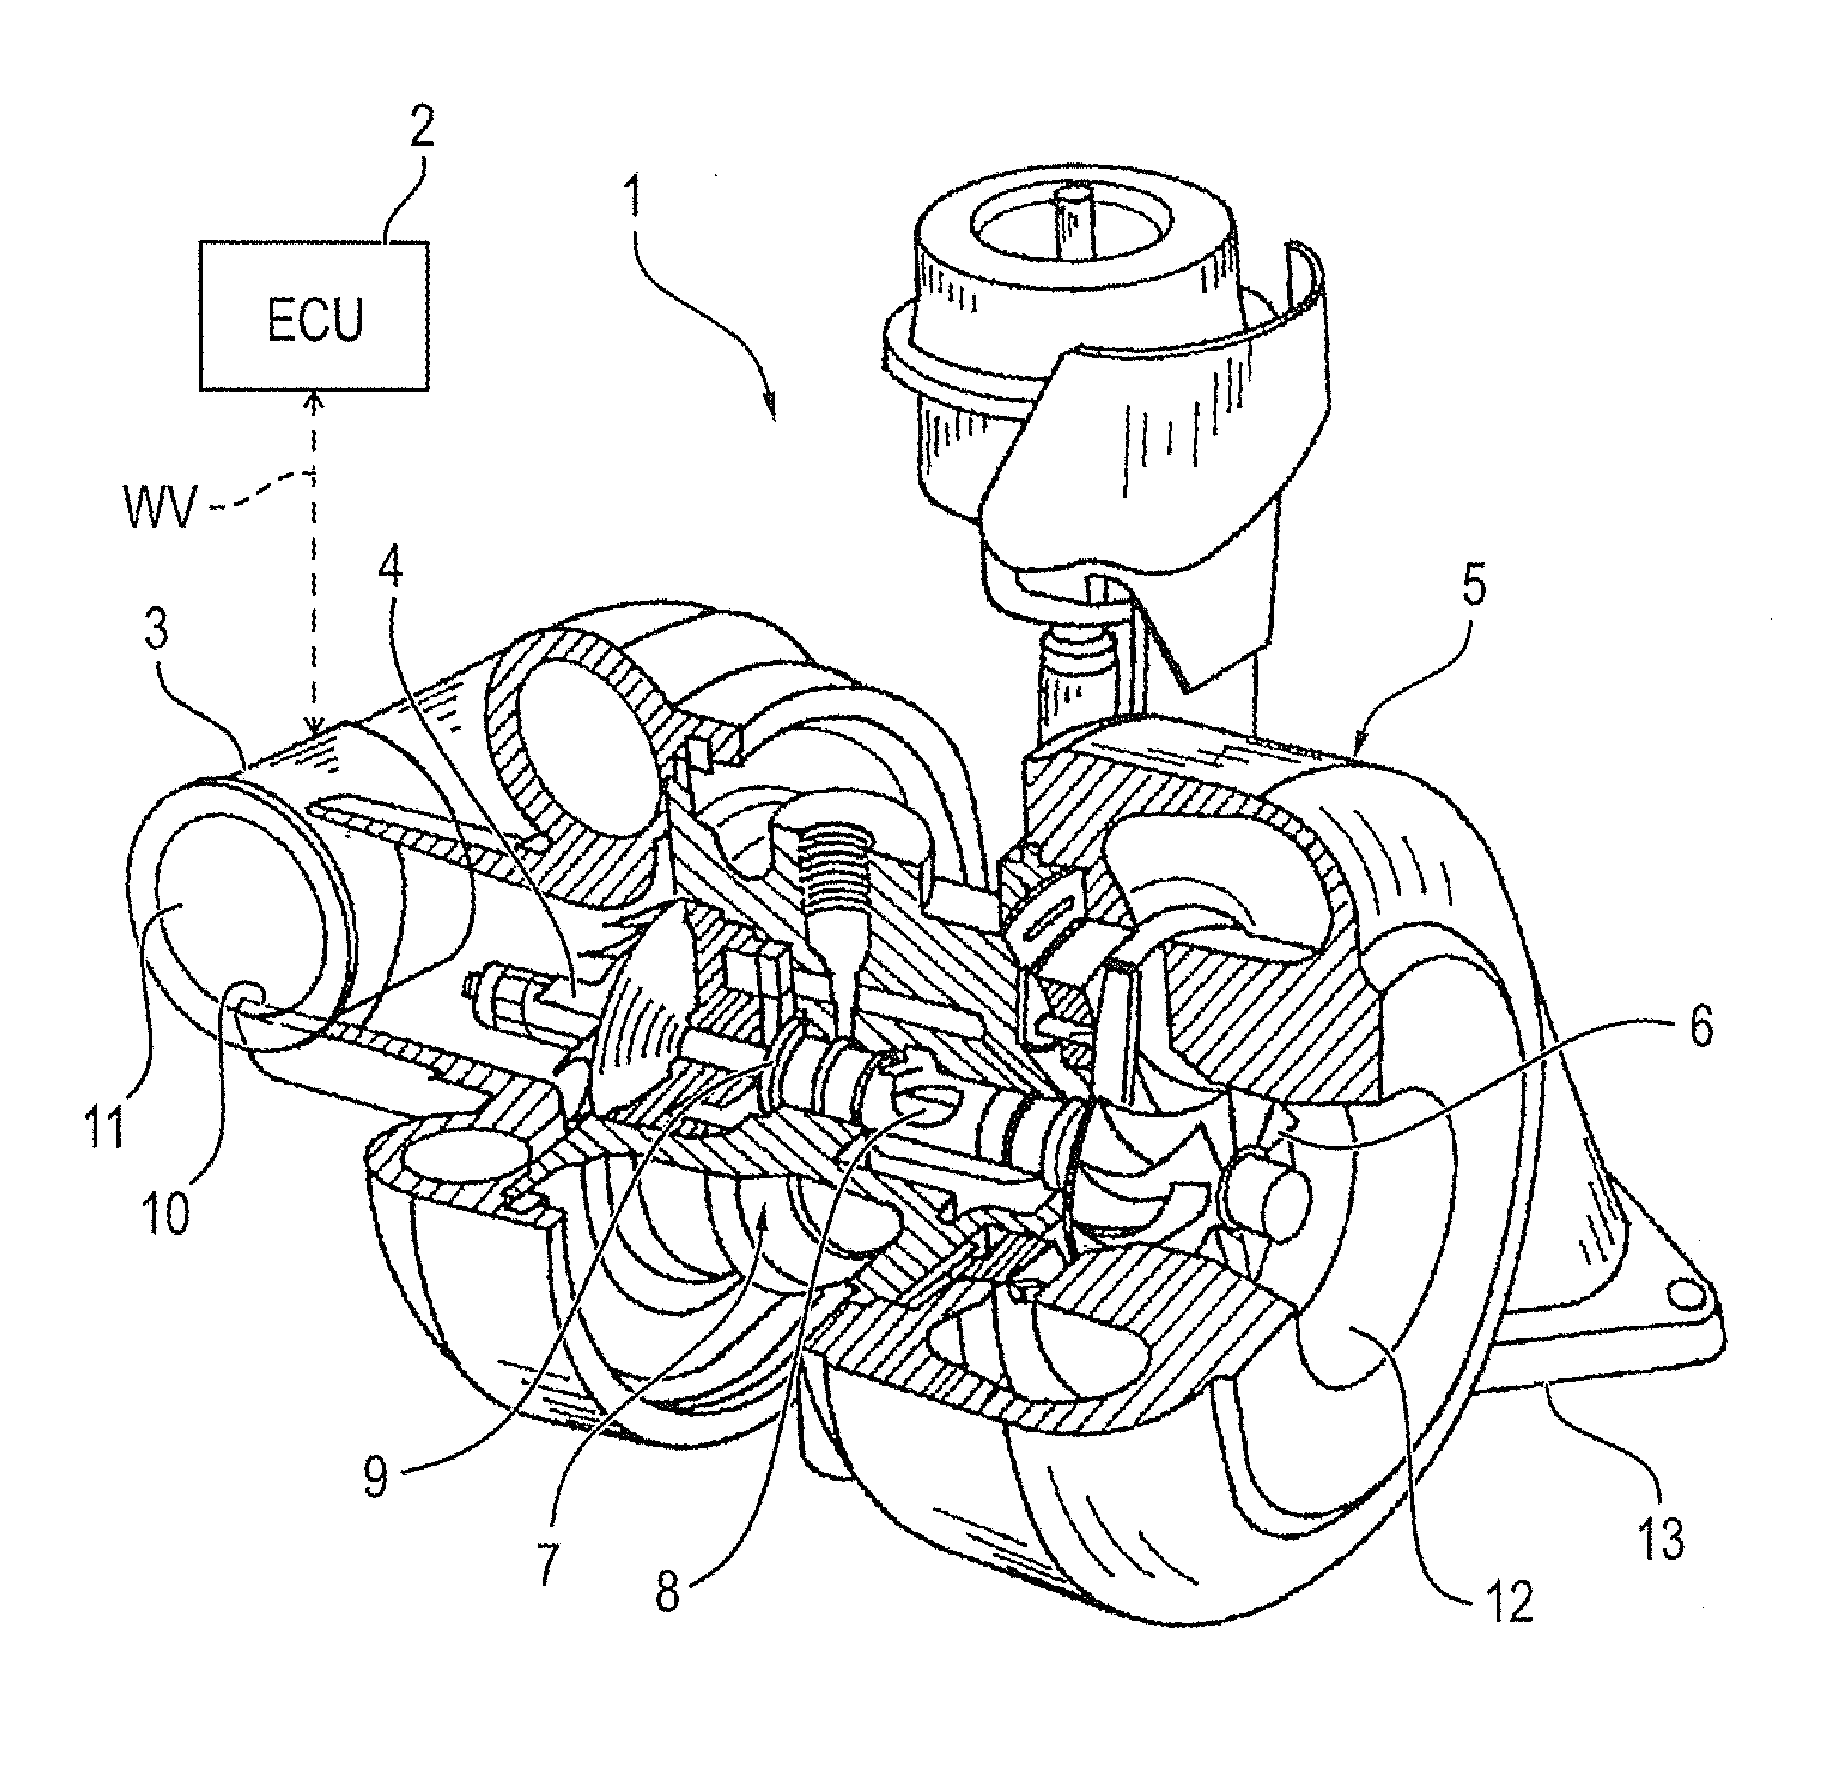 Method for detecting, avoiding and/or limiting critical operating states of an exhaust gas turbocharger